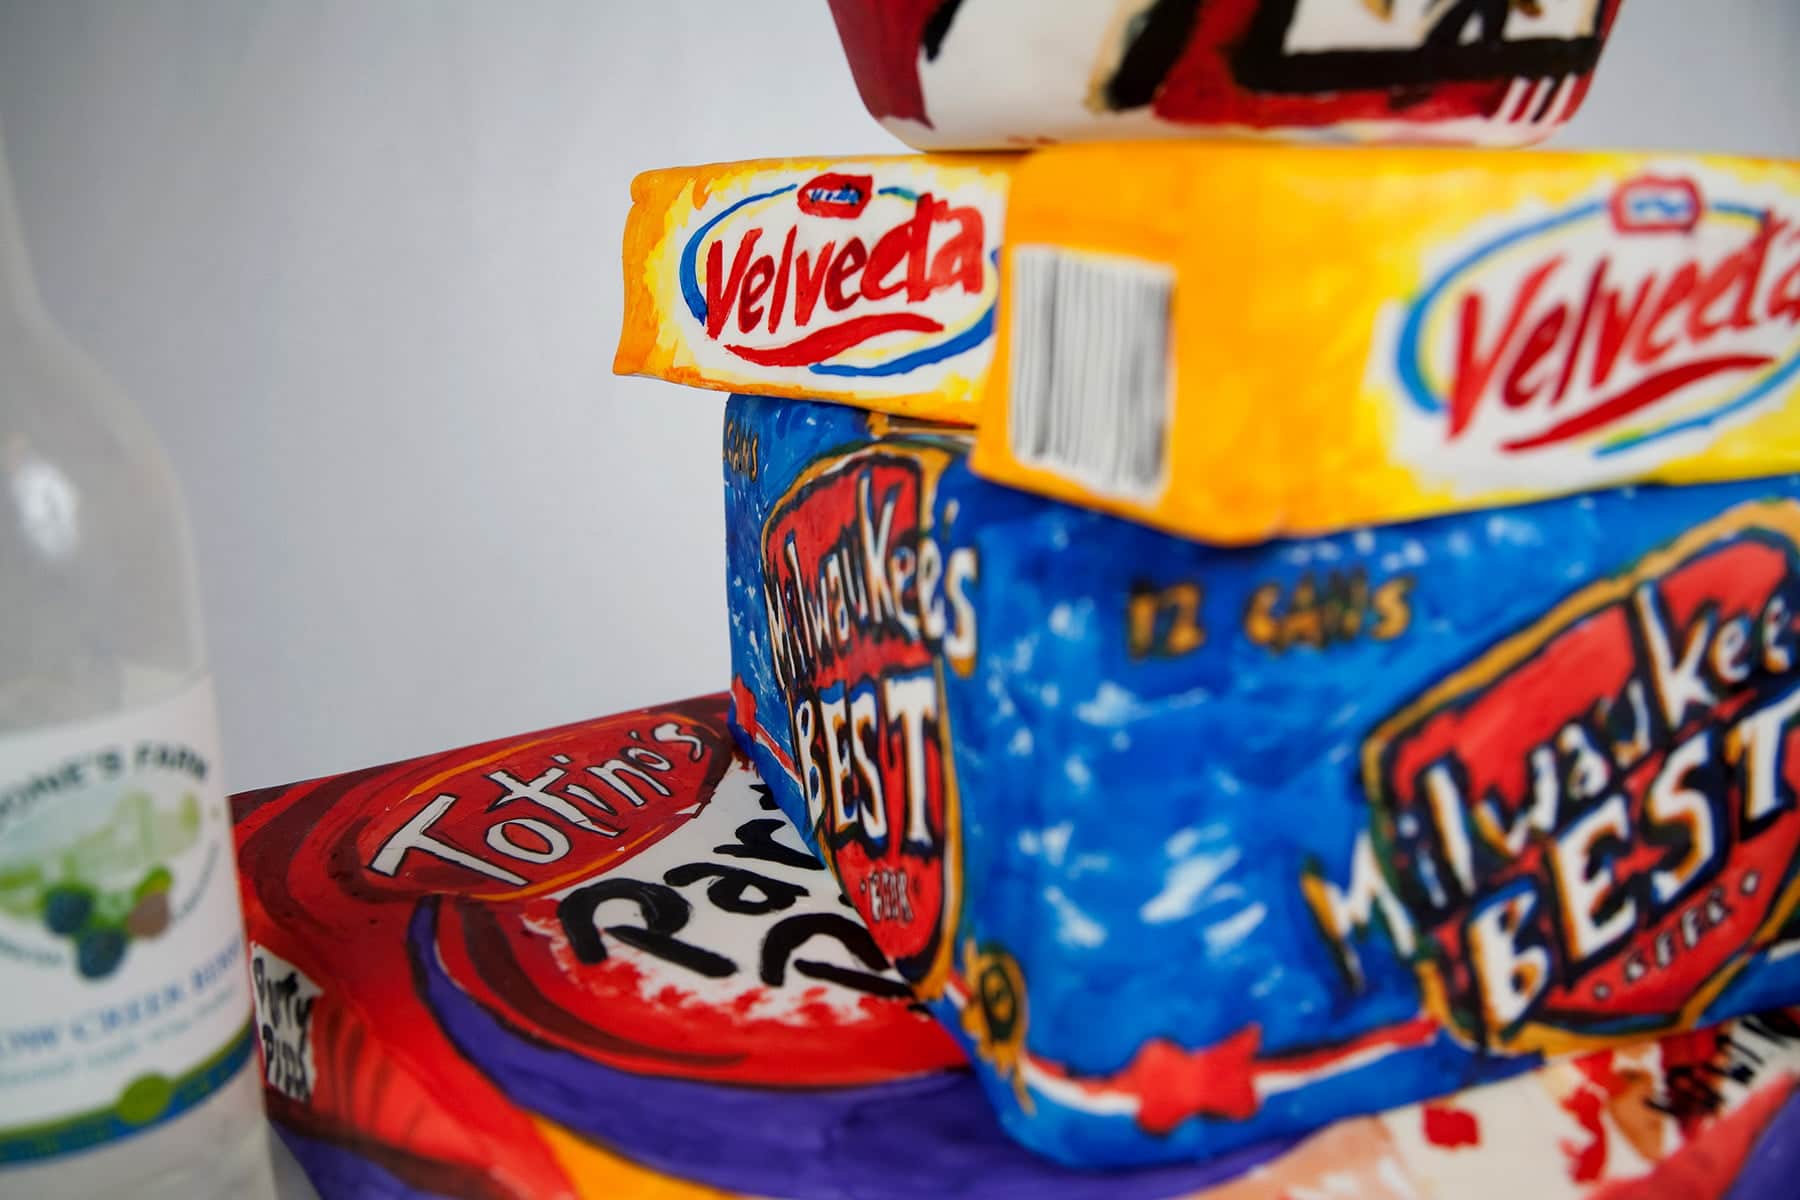 A cake made up of layers and side pieces to look like a Totino's box, a "Milwaukee's Best" case of beer, bricks of Velveeta, a bucket of KFC, a canister of spray cheese, and 2 empty bottles of Boone's Farm. Everything is hand painted with food colouring.